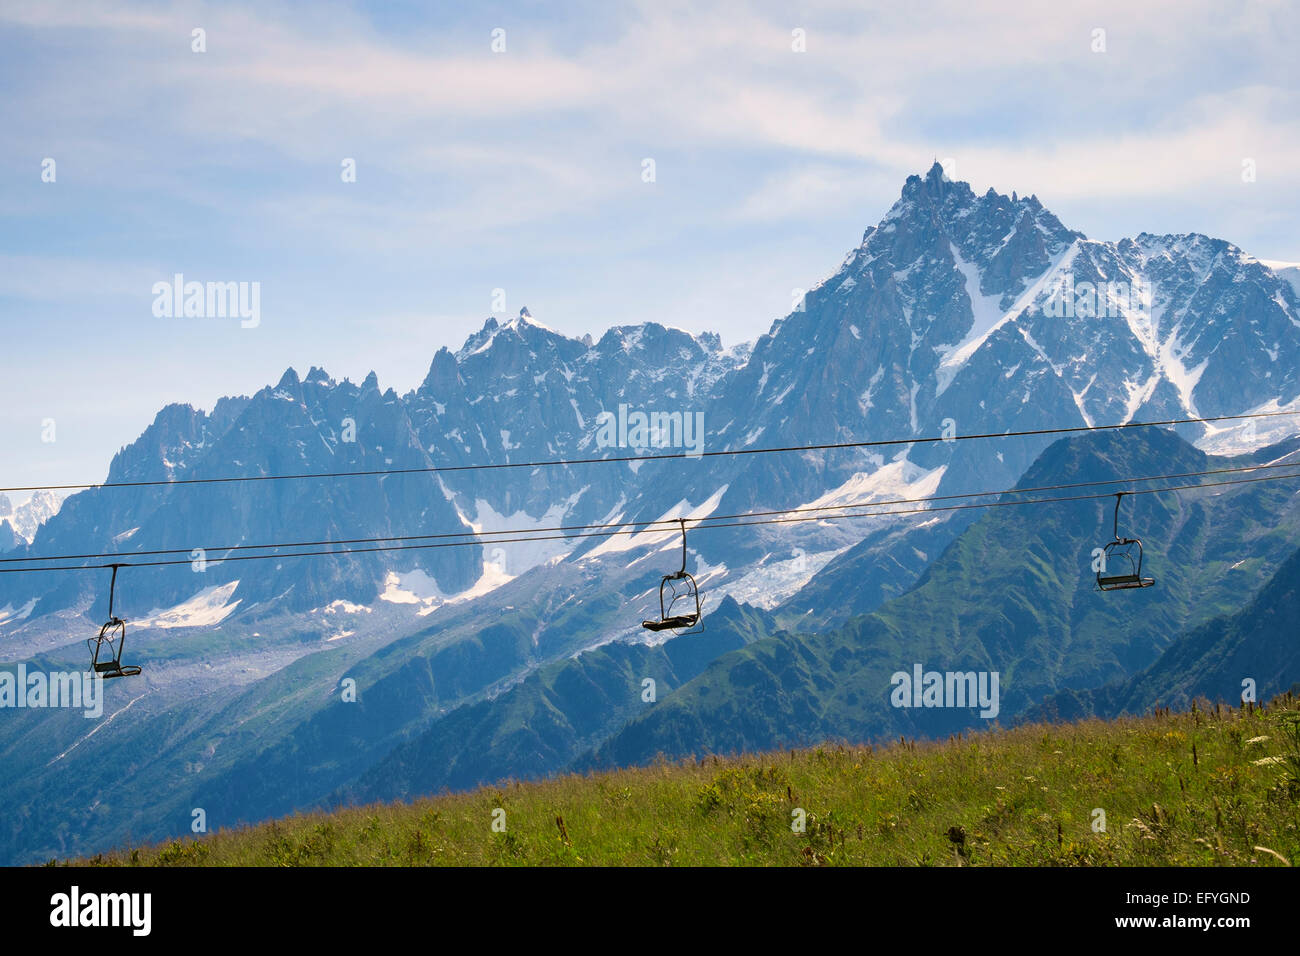 Chairlift with Aiguille du Midi mountain range behind, Chamonix, French Alps, France, Europe in summer Stock Photo